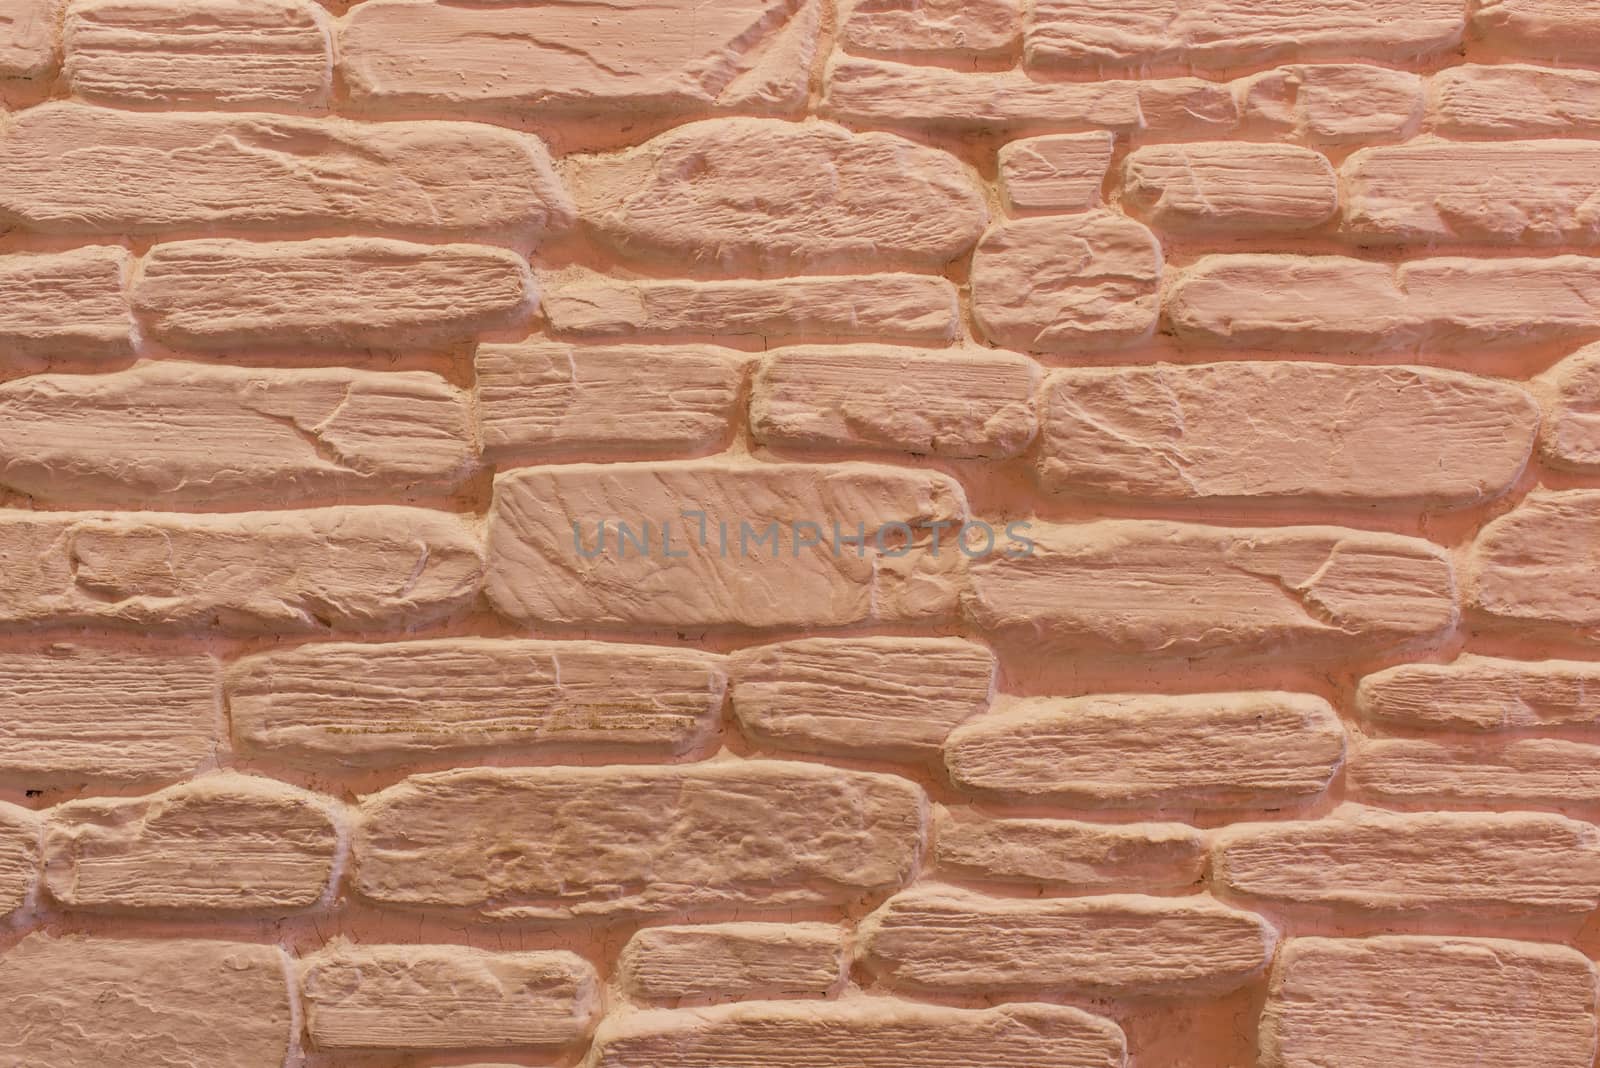 Old Brick Stone Wall Background